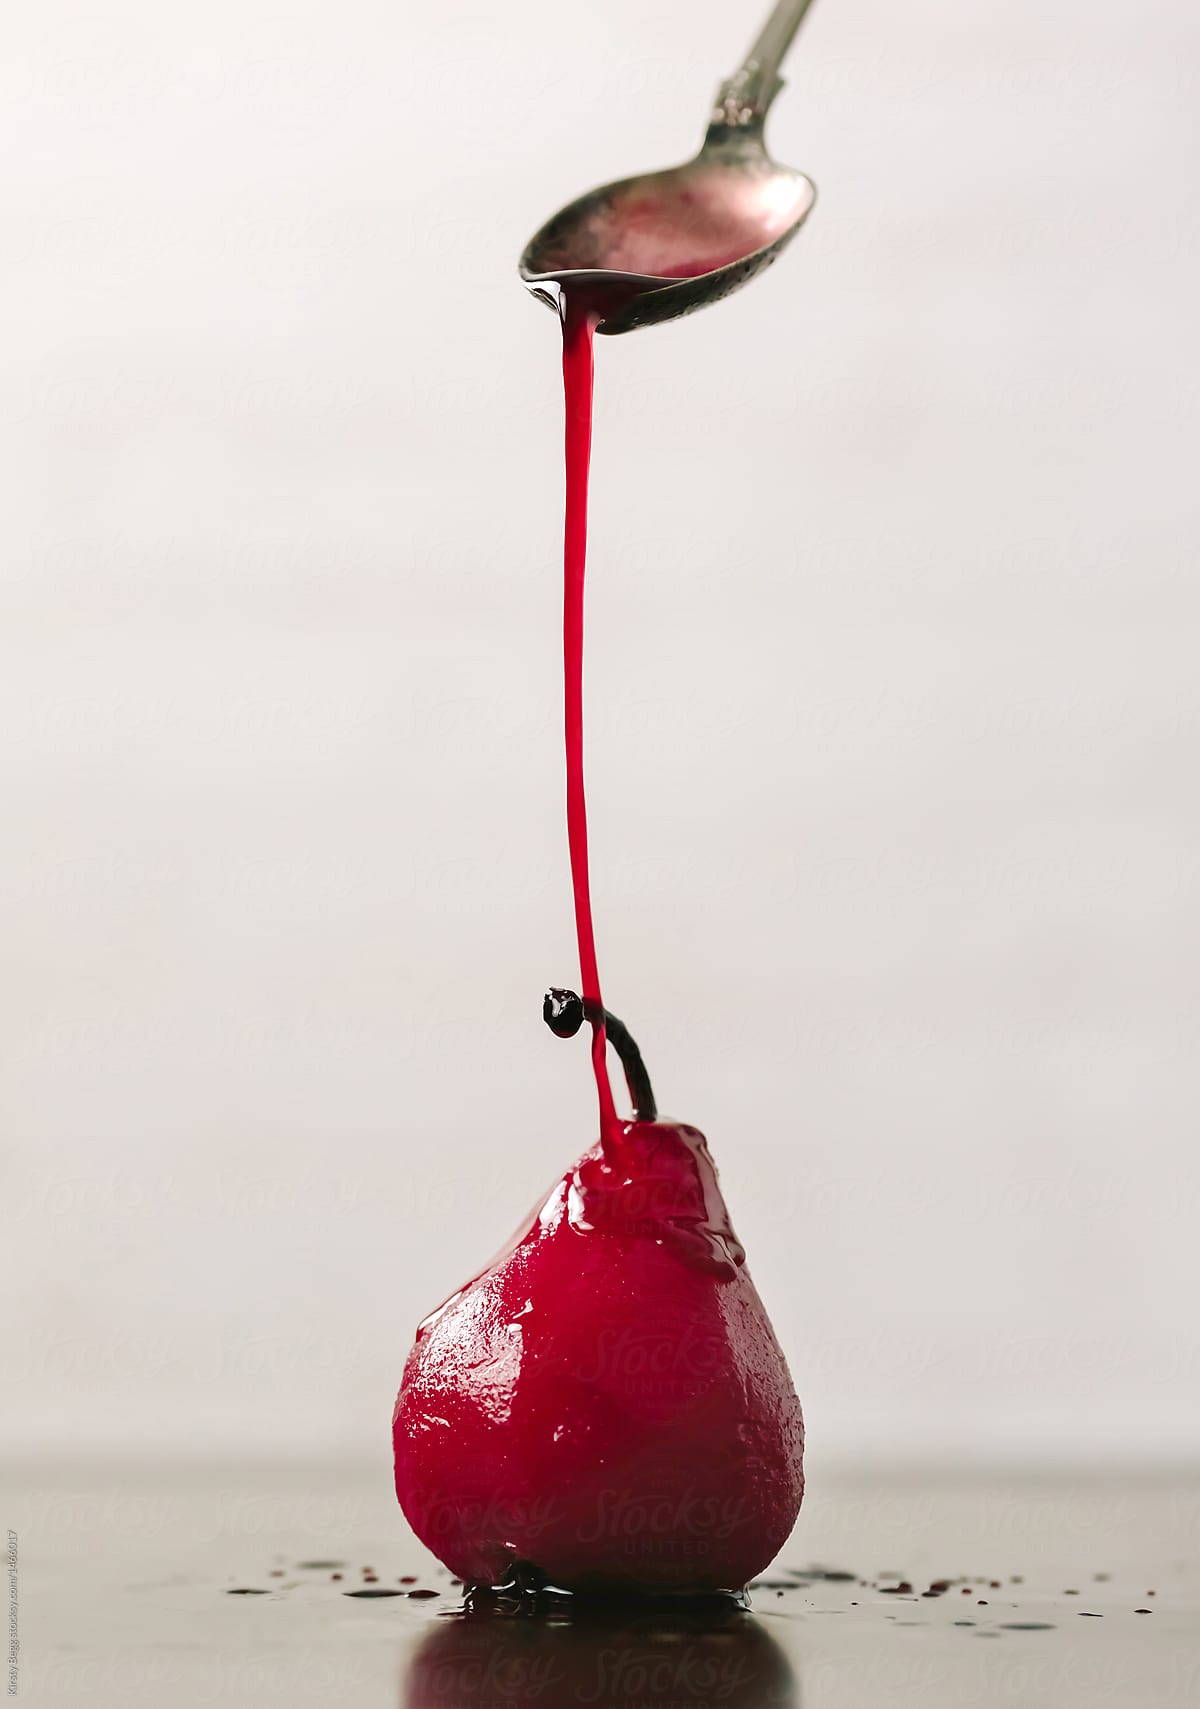 Spoon drizzling red berry juice over poached pear